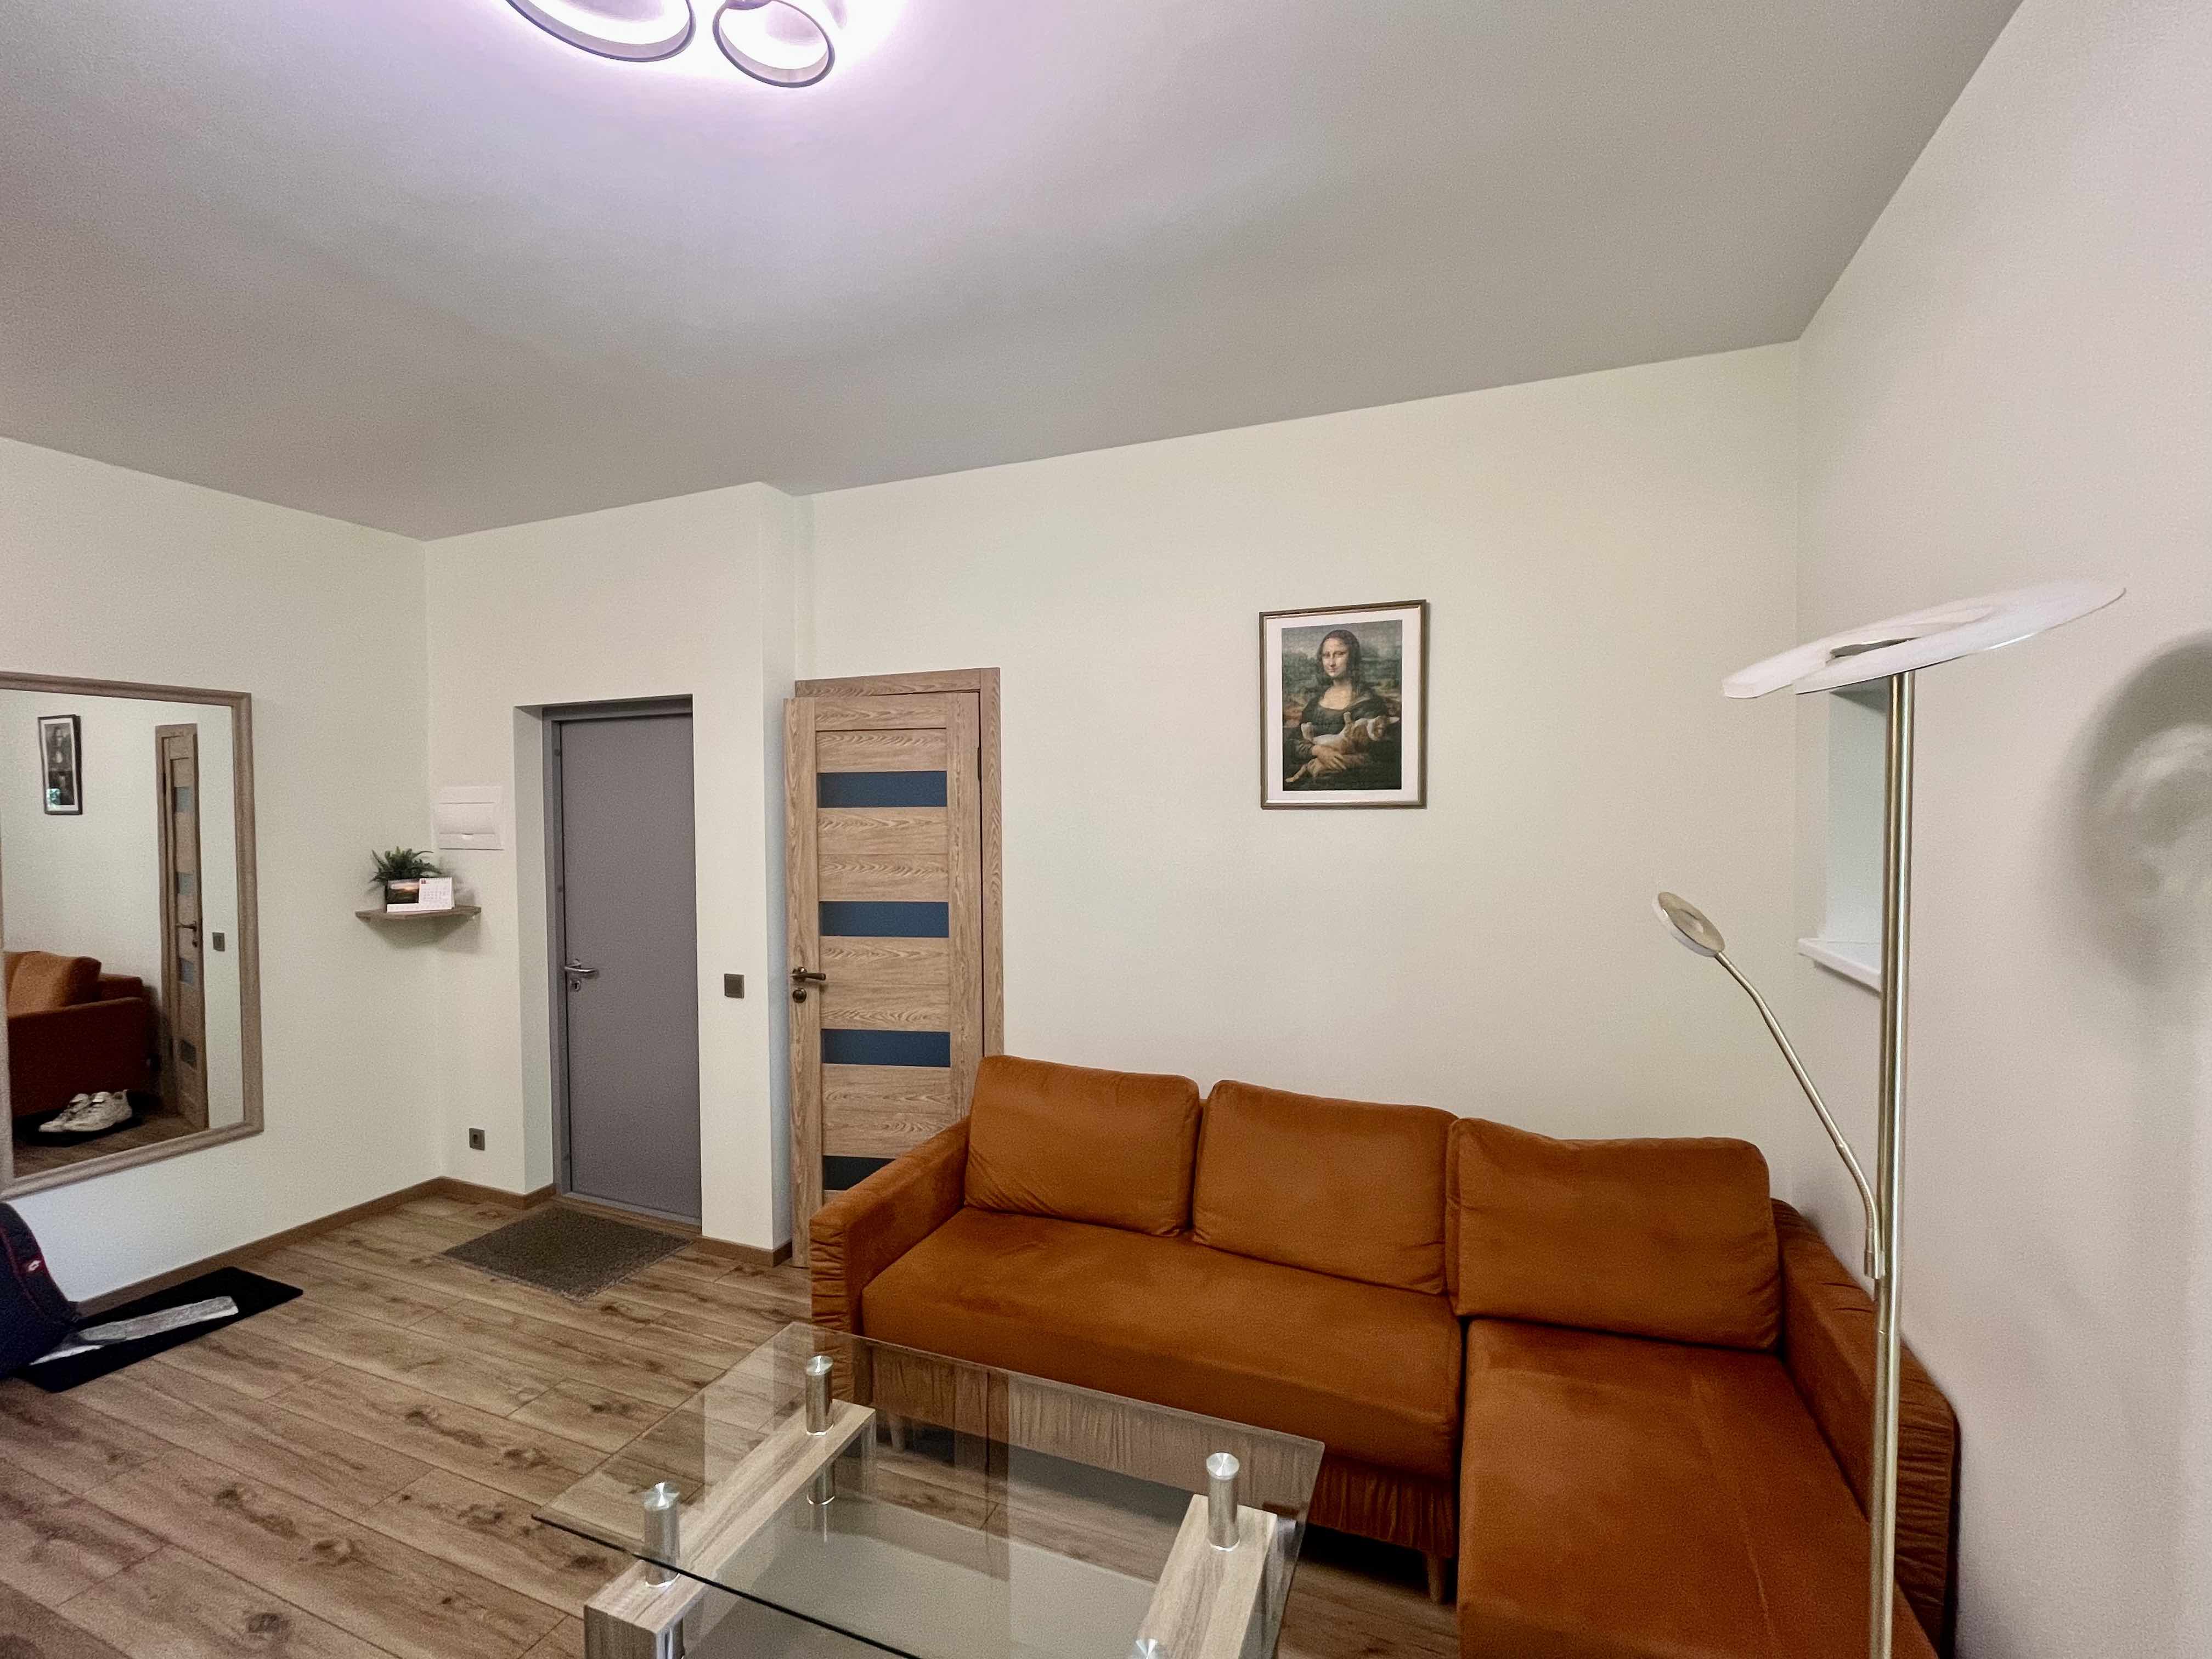 Apartment for rent, Avotu street 4a - Image 1